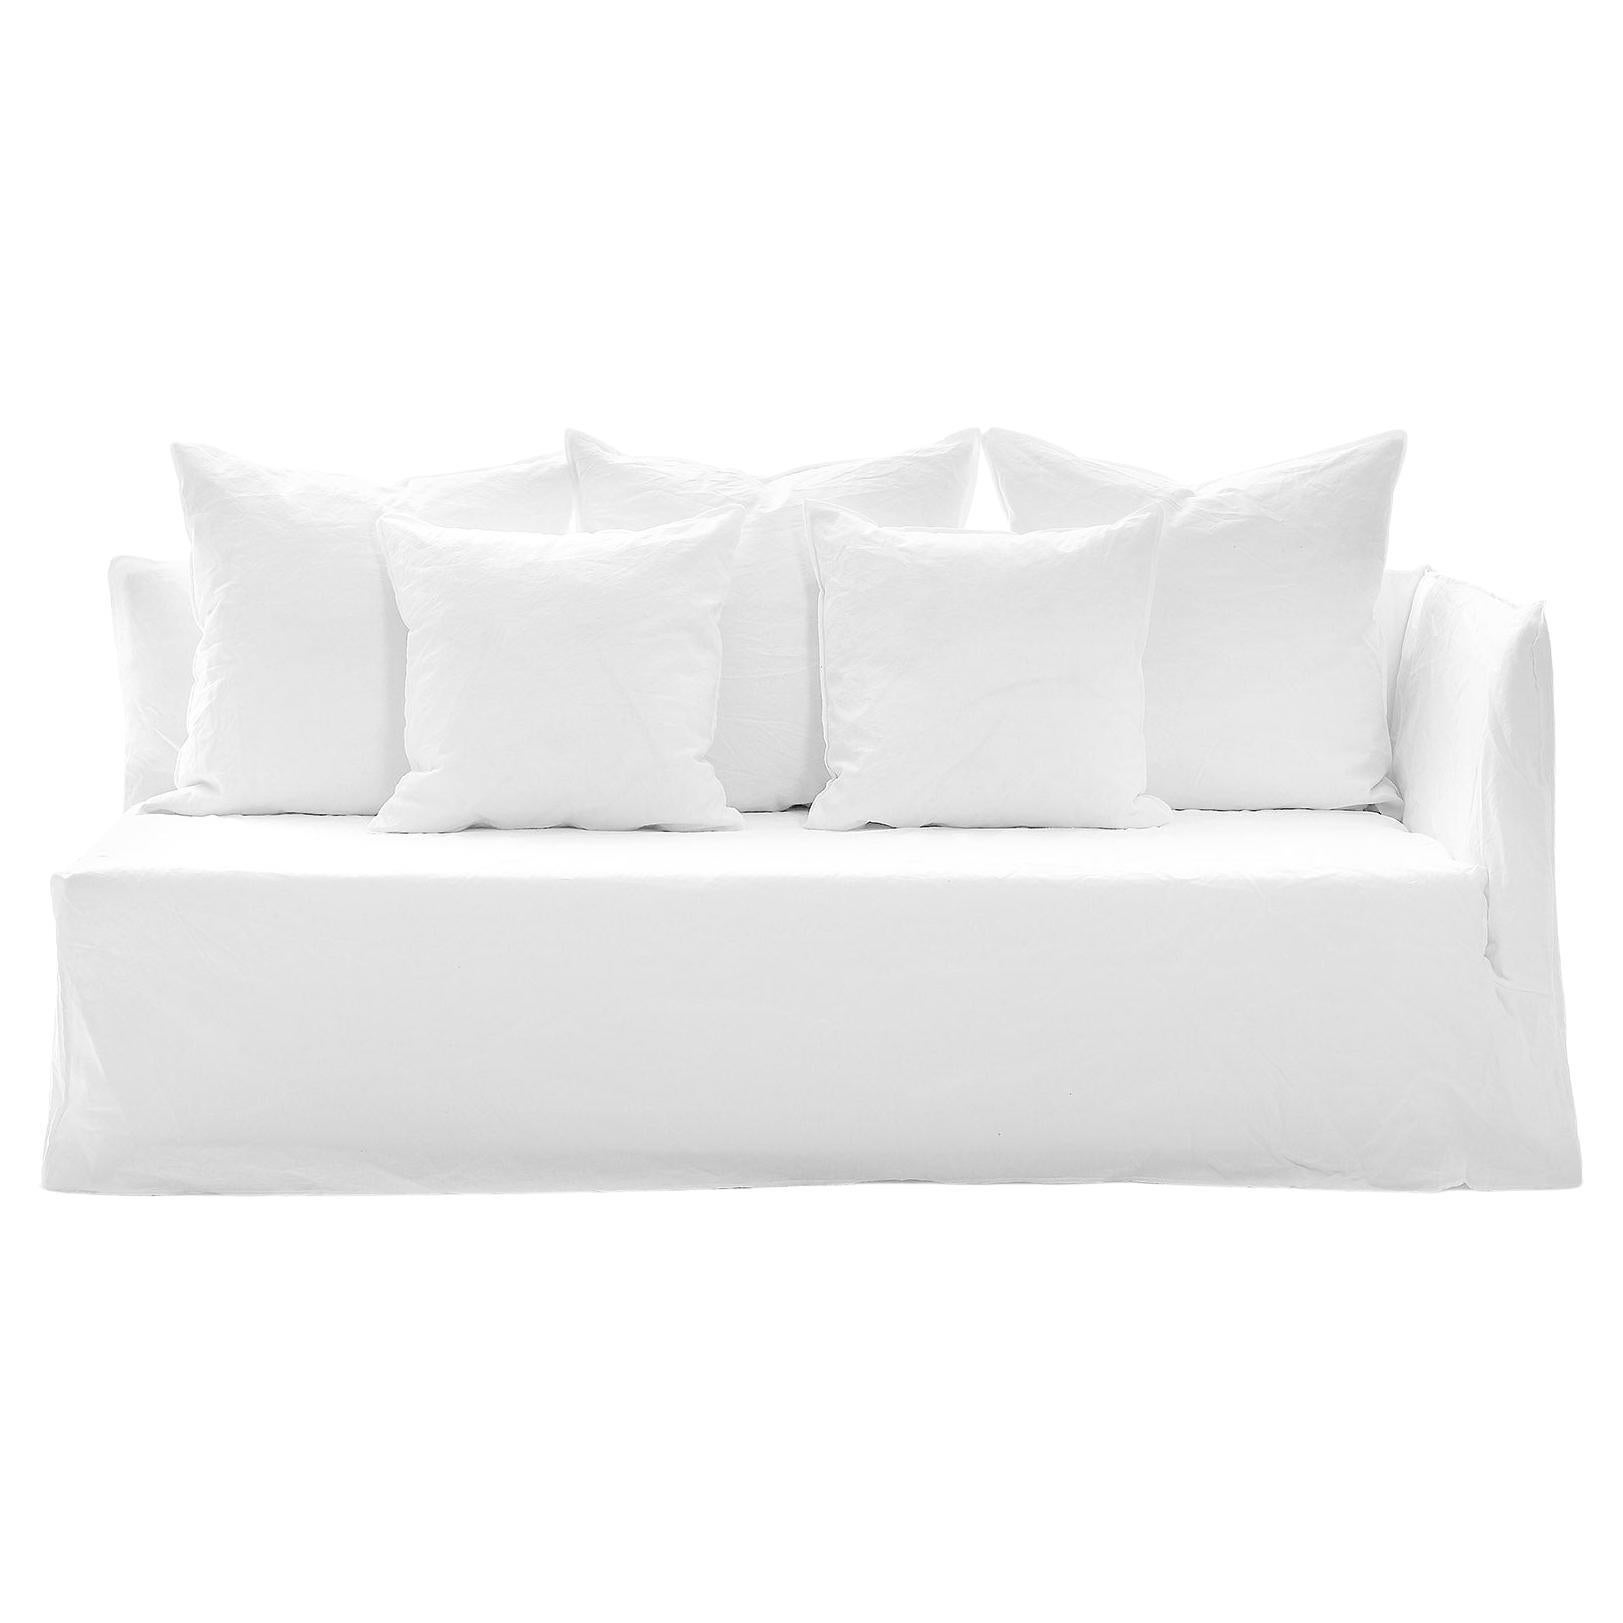 Gervasoni Ghost 21 R Modular Sofa in White Linen Upholstery by Paola Navone For Sale